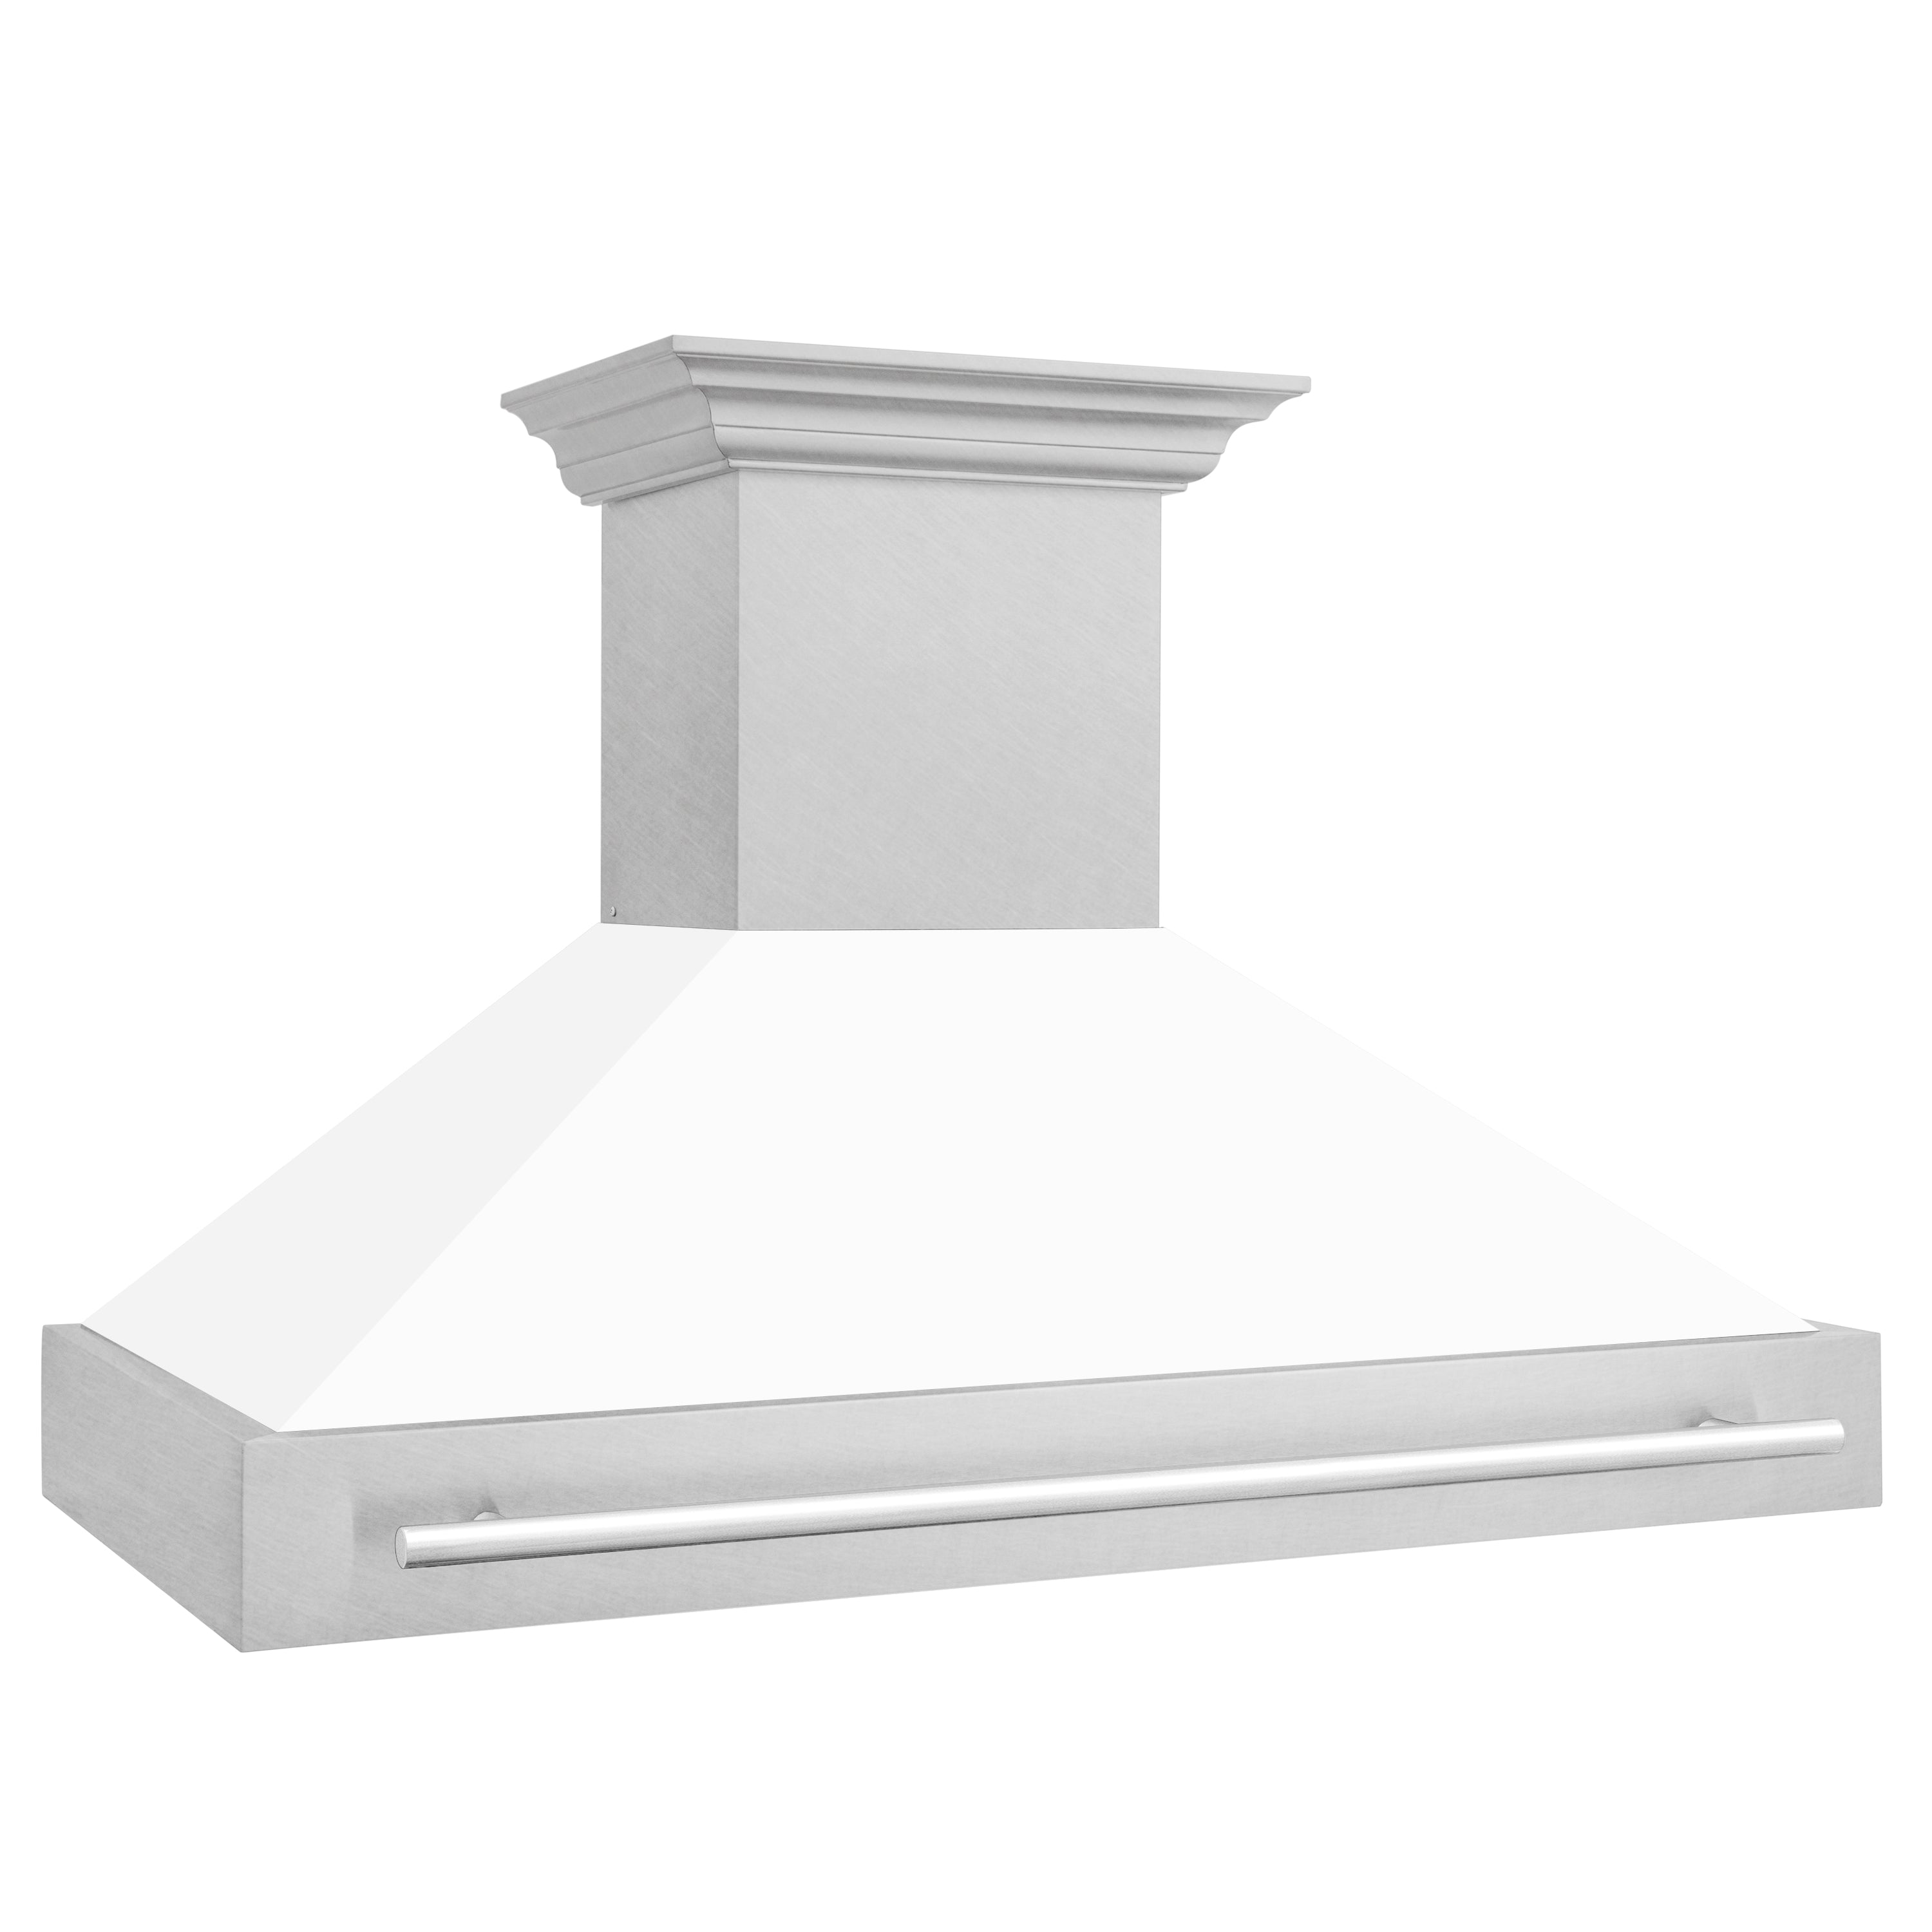 ZLINE 48 in. Fingerprint Resistant Stainless Steel Range Hood with Colored Shell Options (8654SNX-48) side.